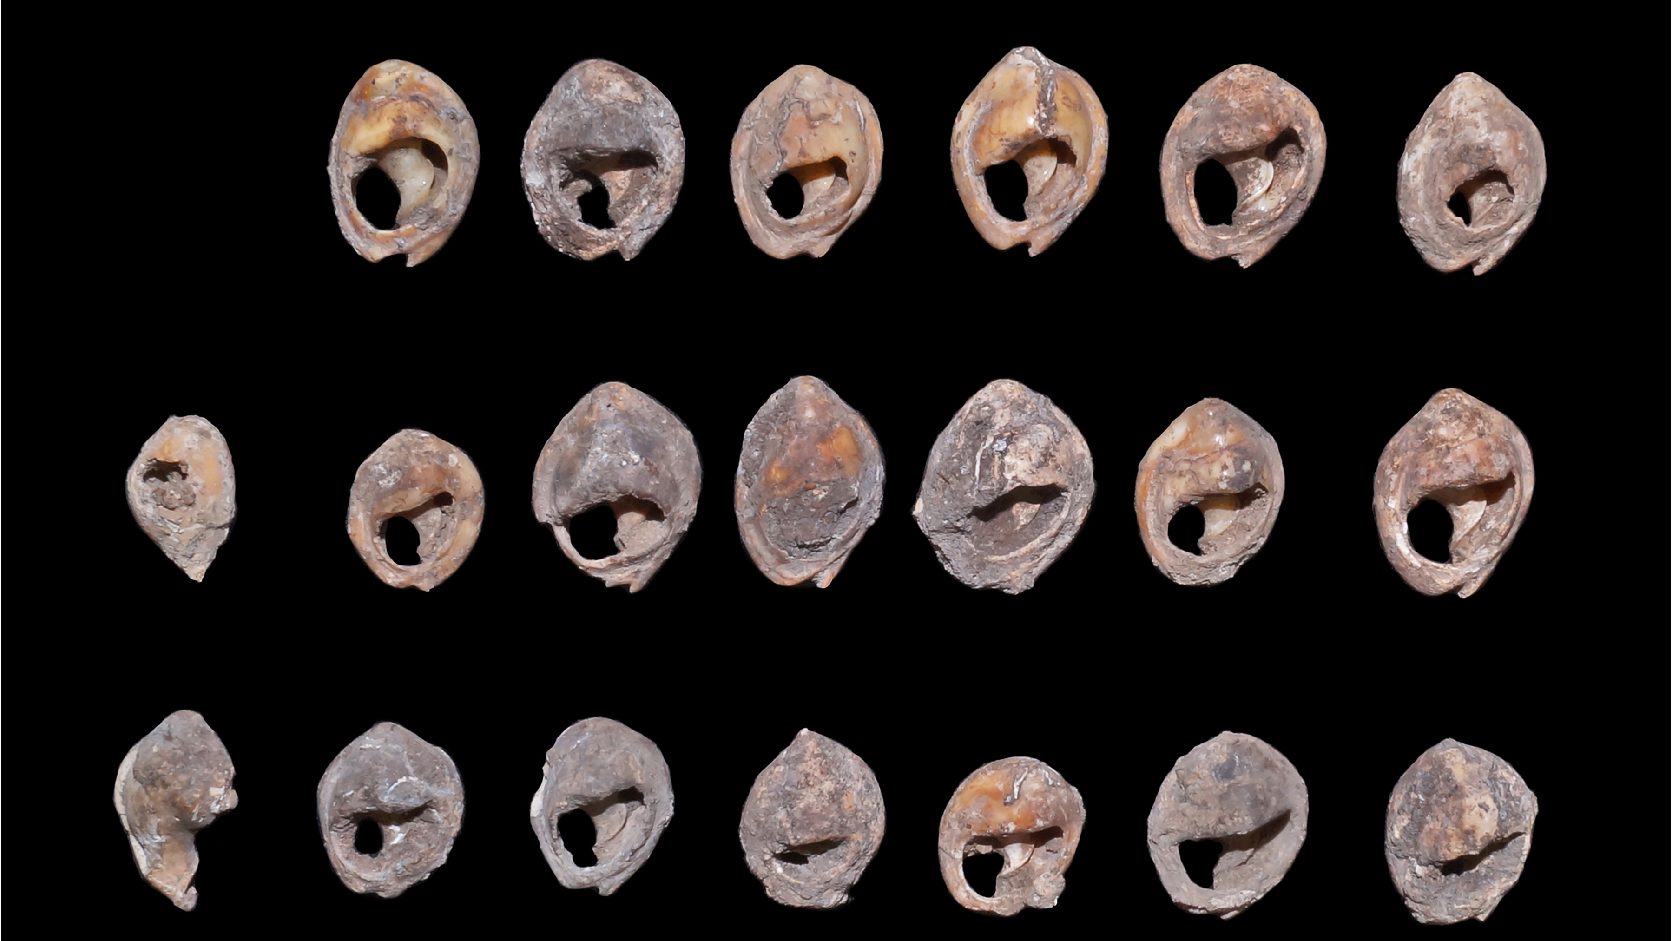 They found the oldest scalloped pearls in the world